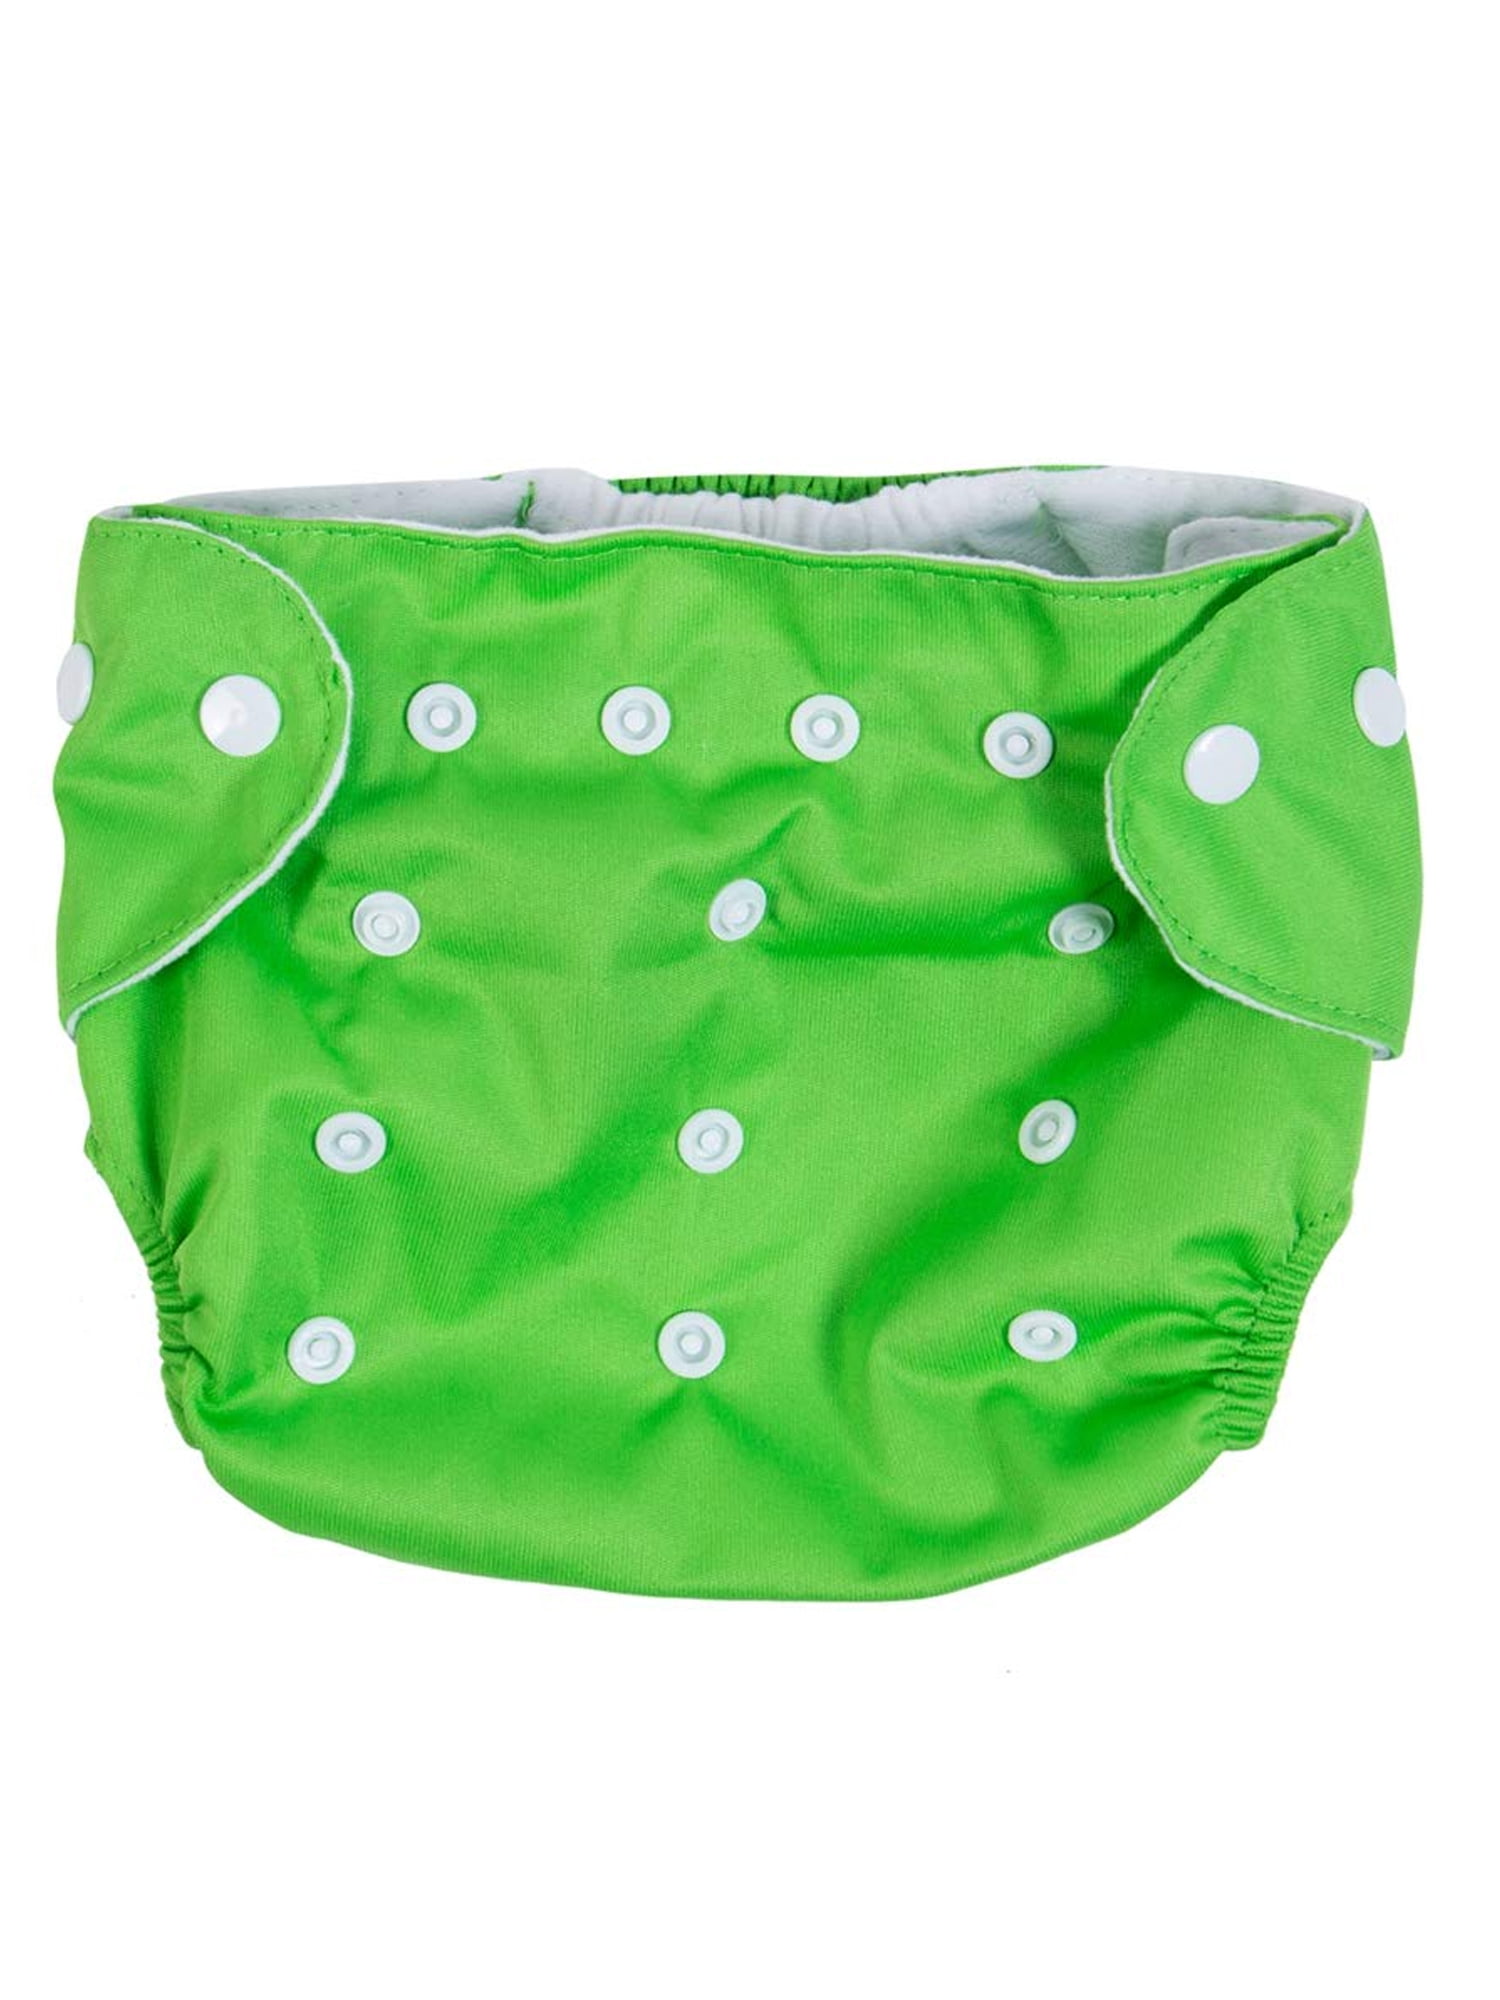 Avocados ECOPIPO Baby One Size Adjustable Washable Reusable Pocket Cloth Diaper for Baby Girls and Boys 